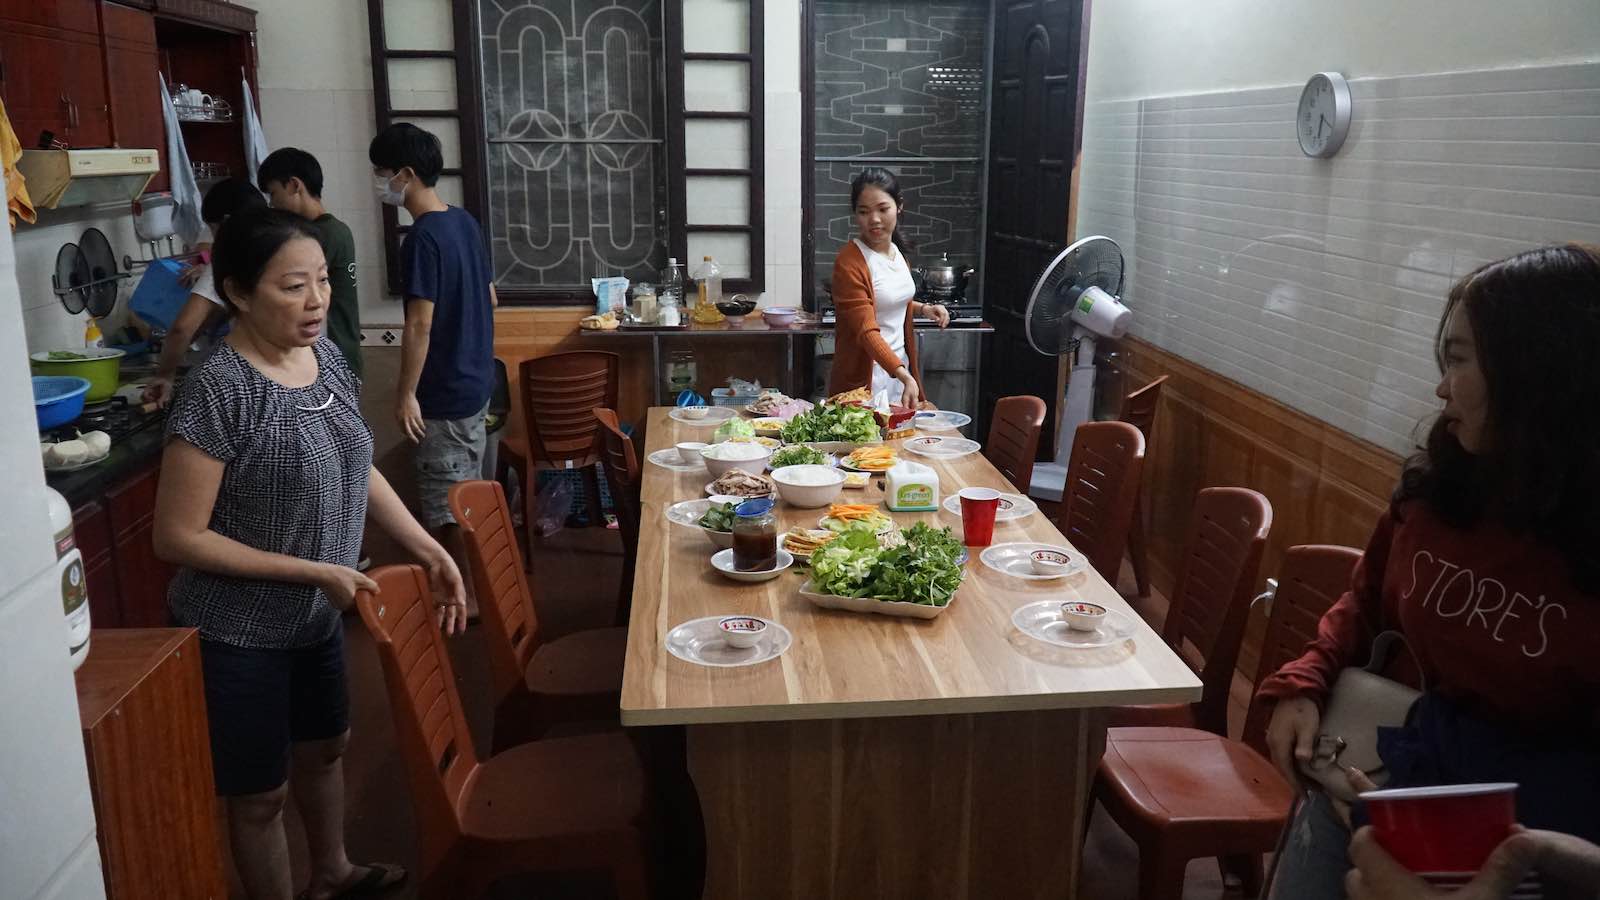 Most nights I had dinner together with the family and the community of students that came by the house after class to hang out. There's nothing like having a home cooked meal on the other side of the world after having backpacked for 3+ months without a home.